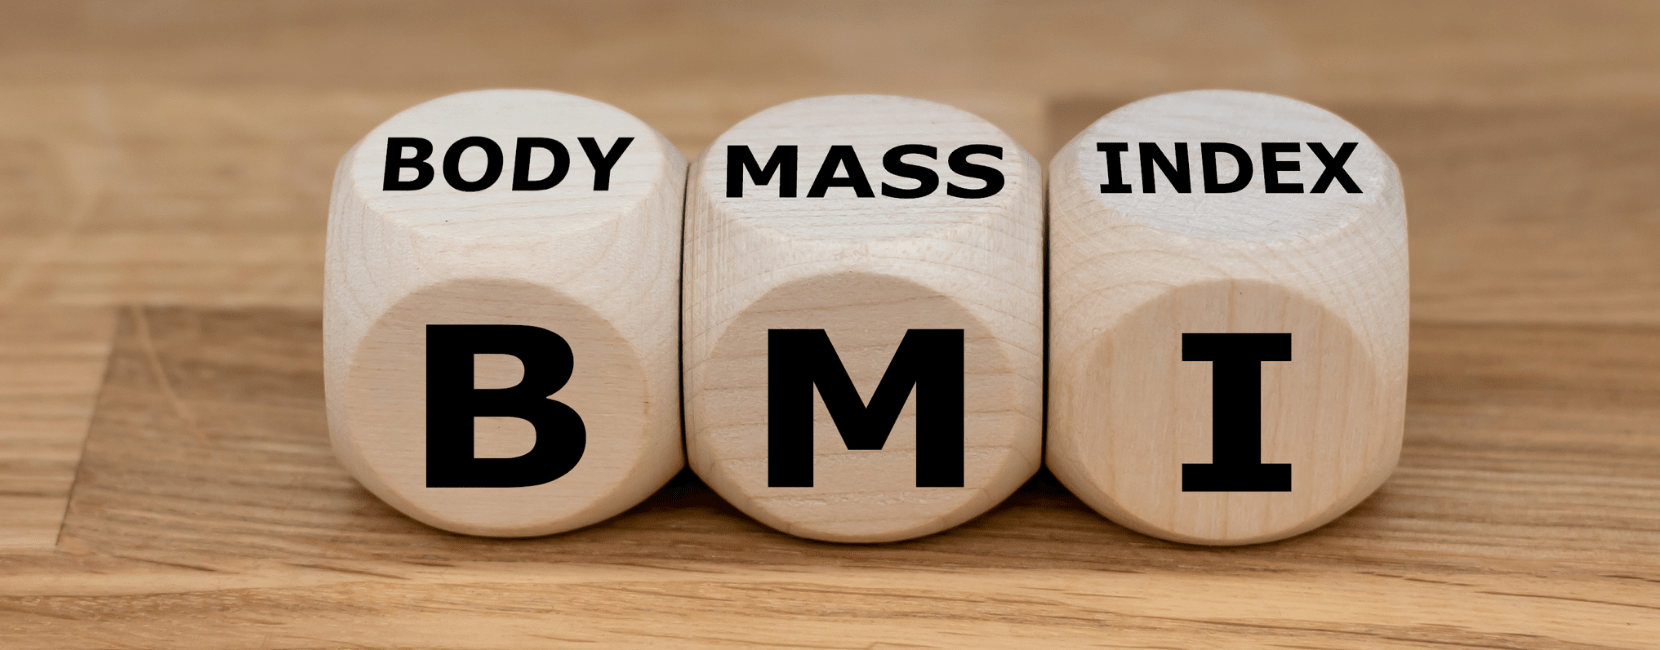 bmi-featured-image